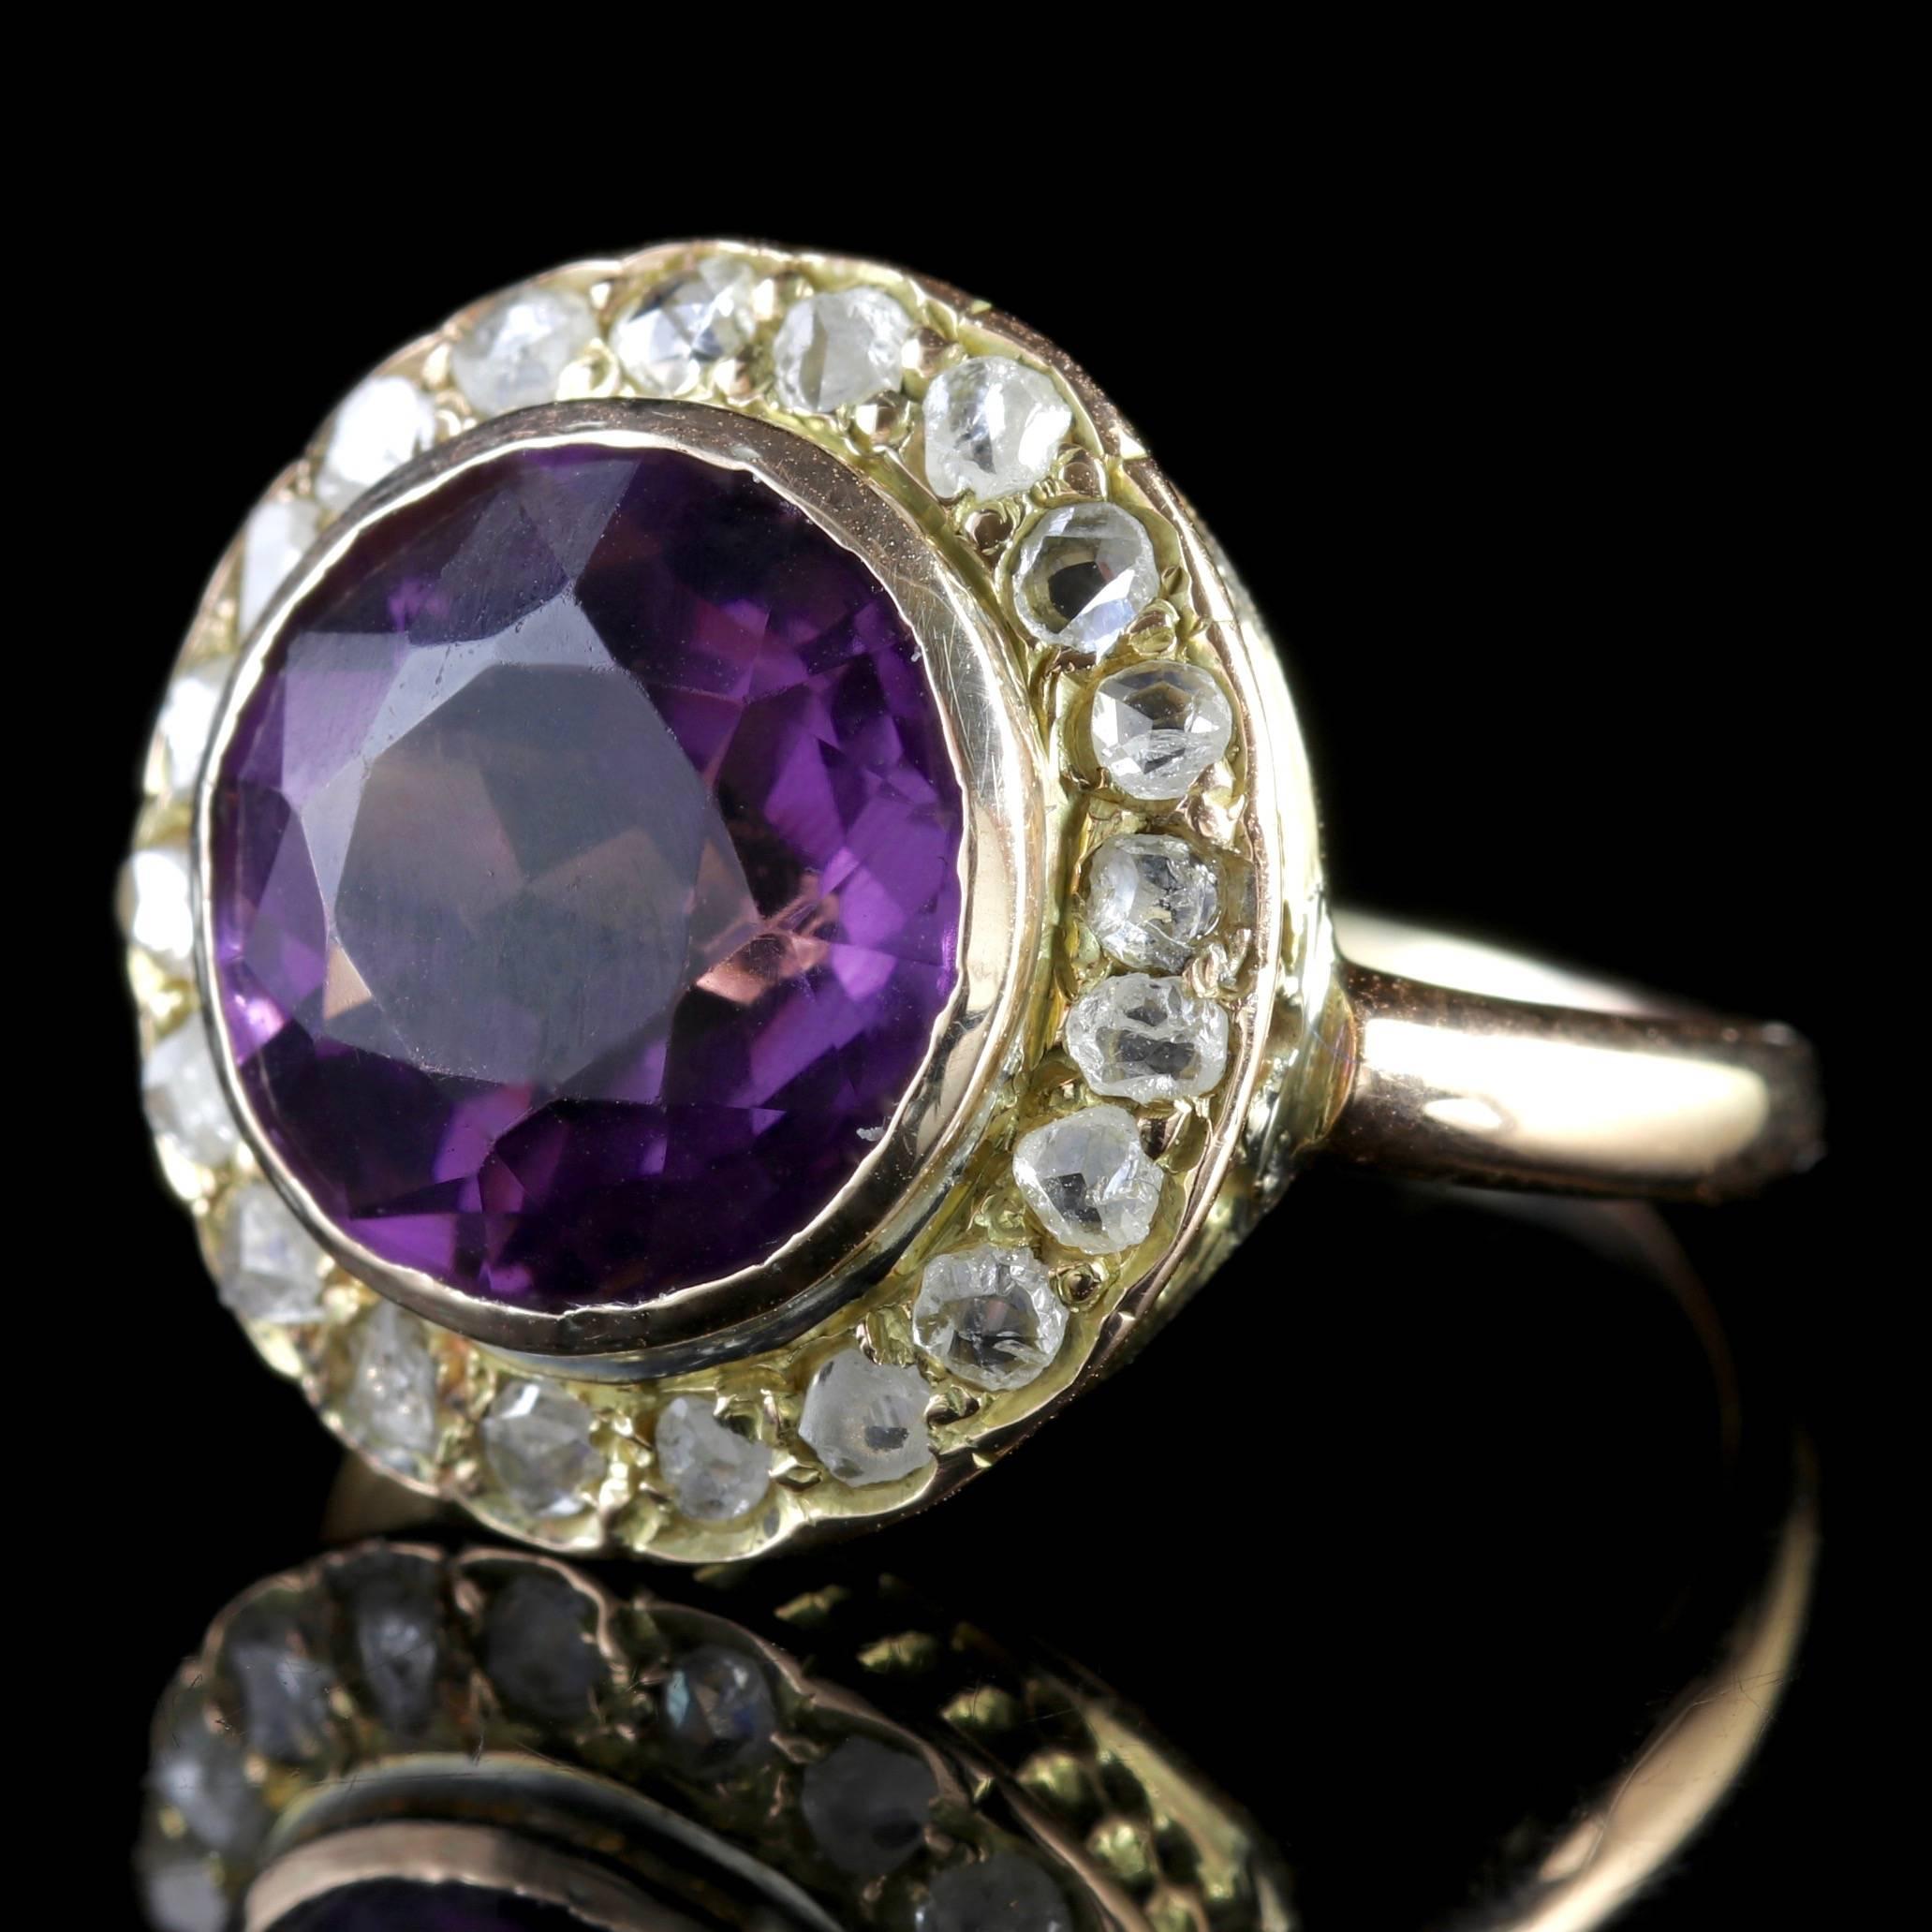 To read more please click continue reading below-

This genuine antique Victorian 18ct Yellow Gold ring boasts a 5ct natural Amethyst in the centre surrounded by a halo of Diamonds.

Amethyst has been highly esteemed throughout the ages for its